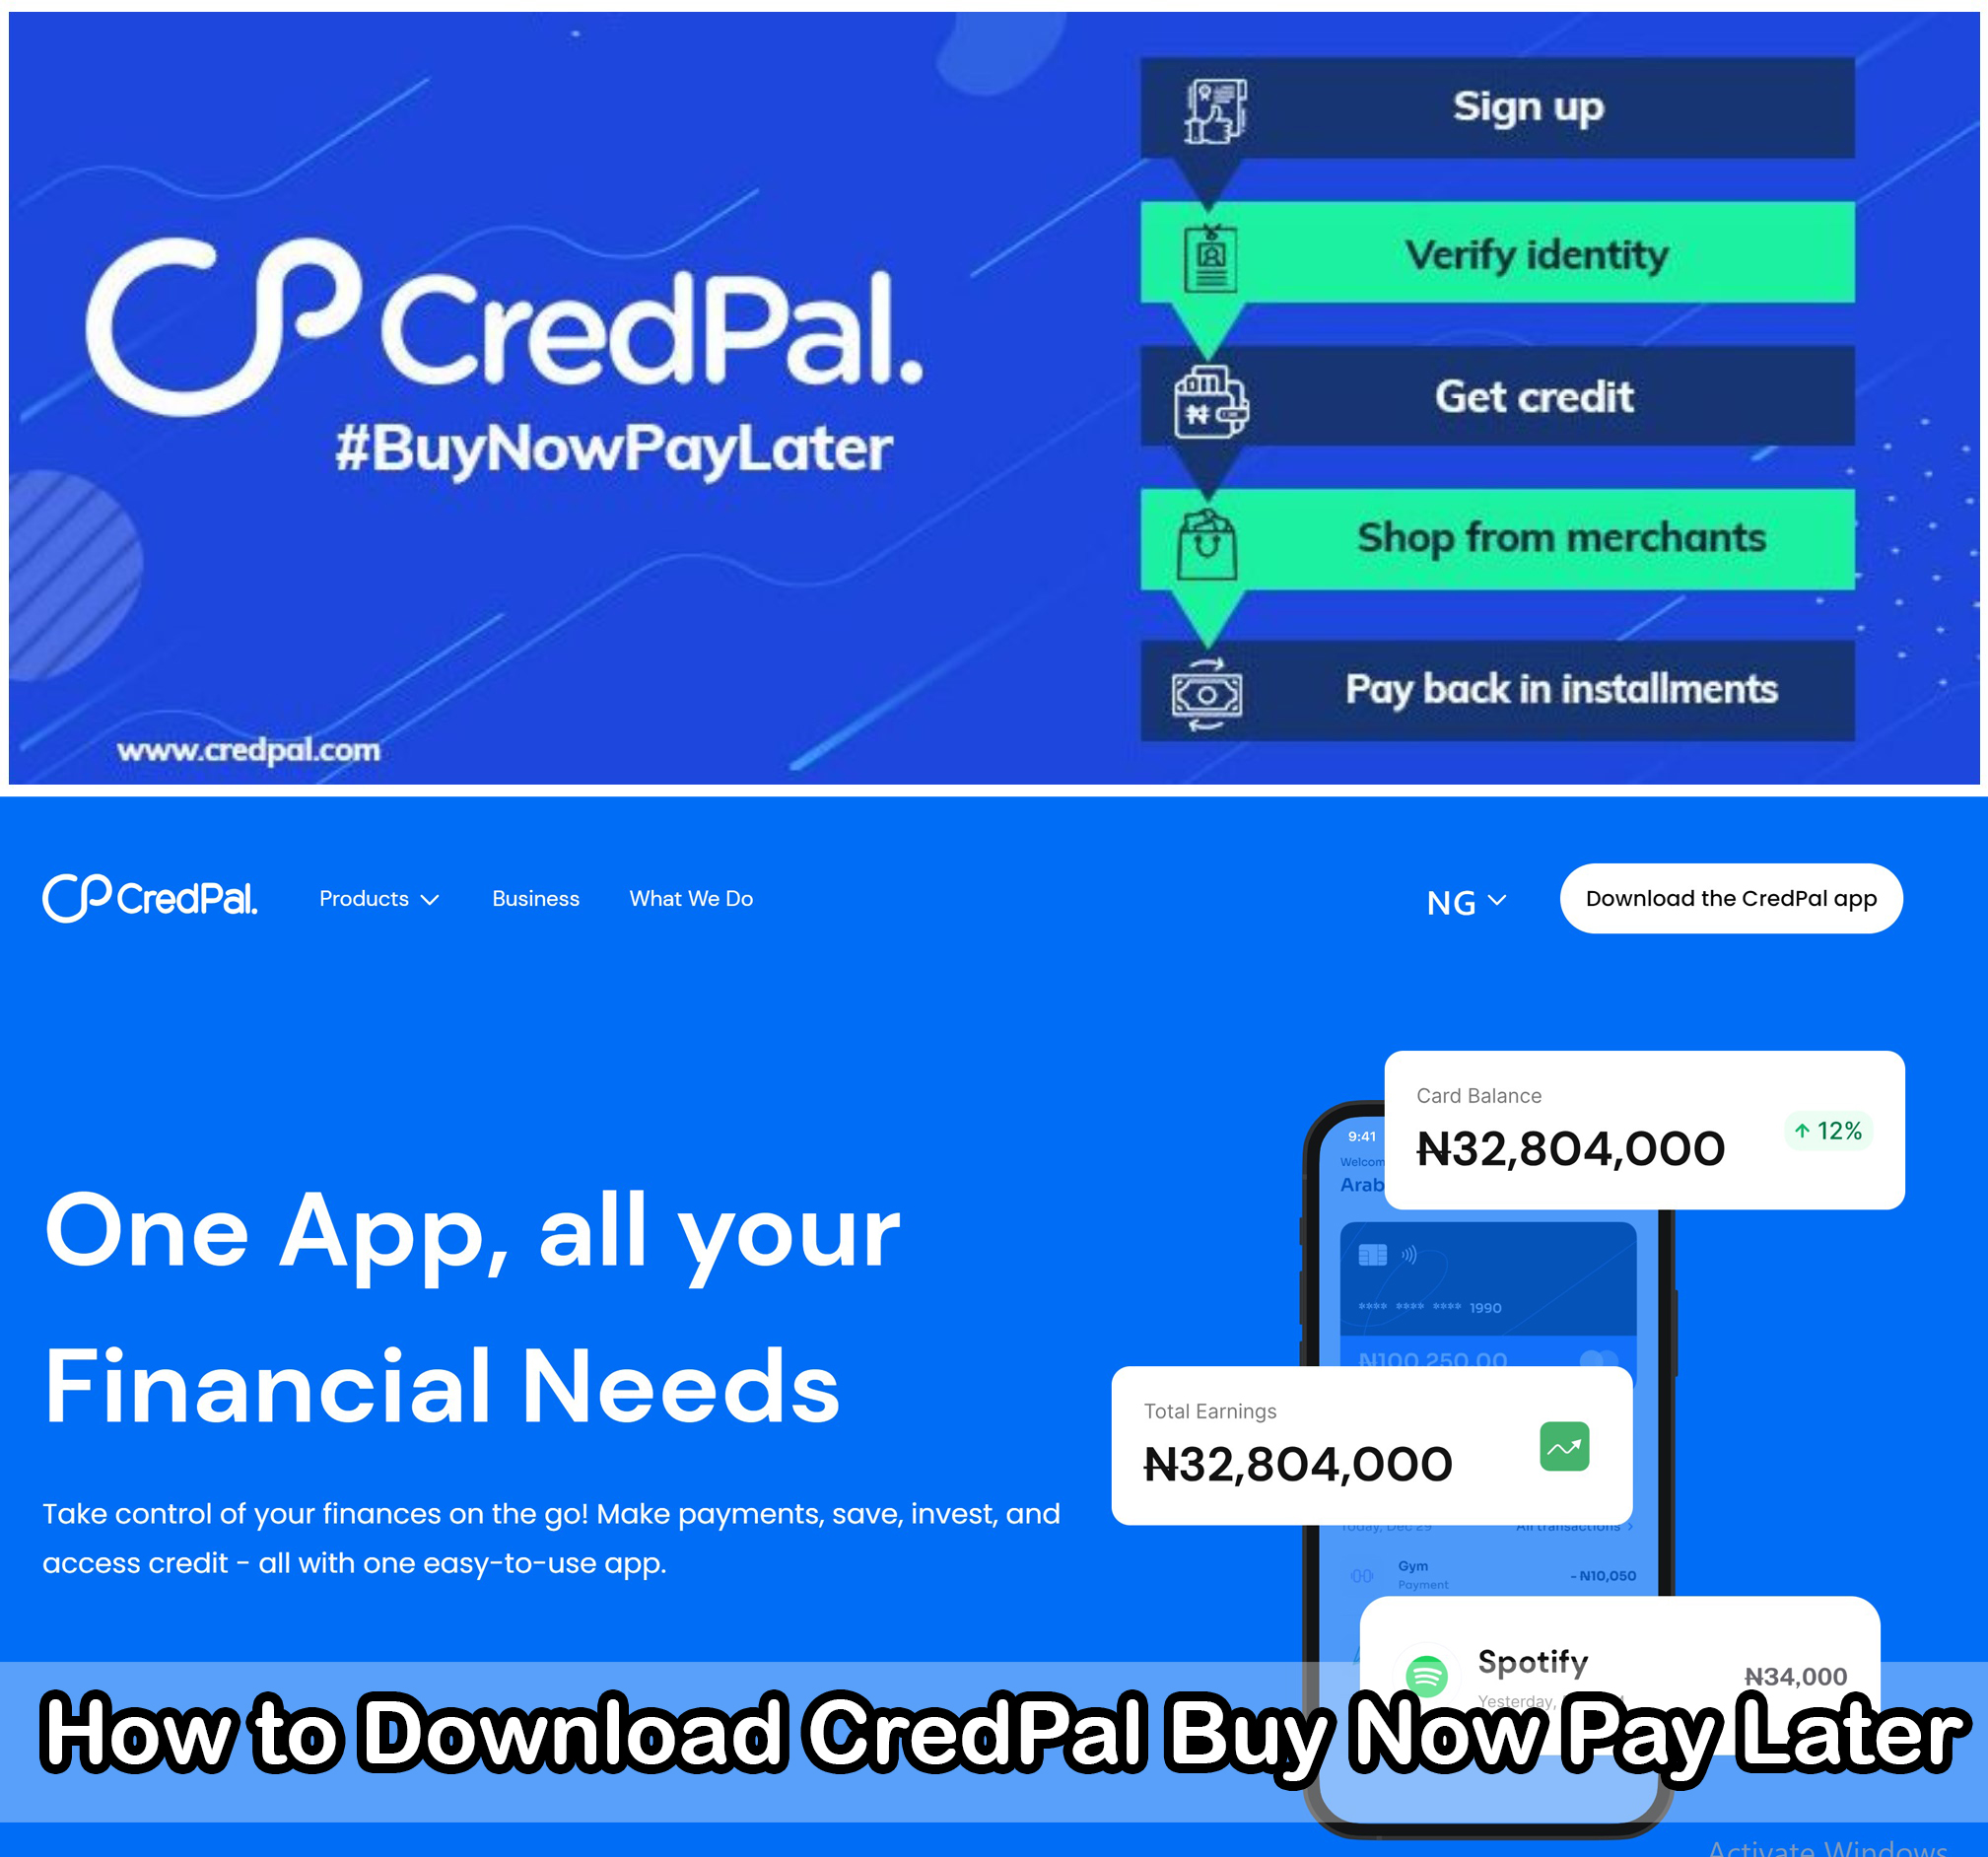 How to Download CredPal Buy Now Pay Later